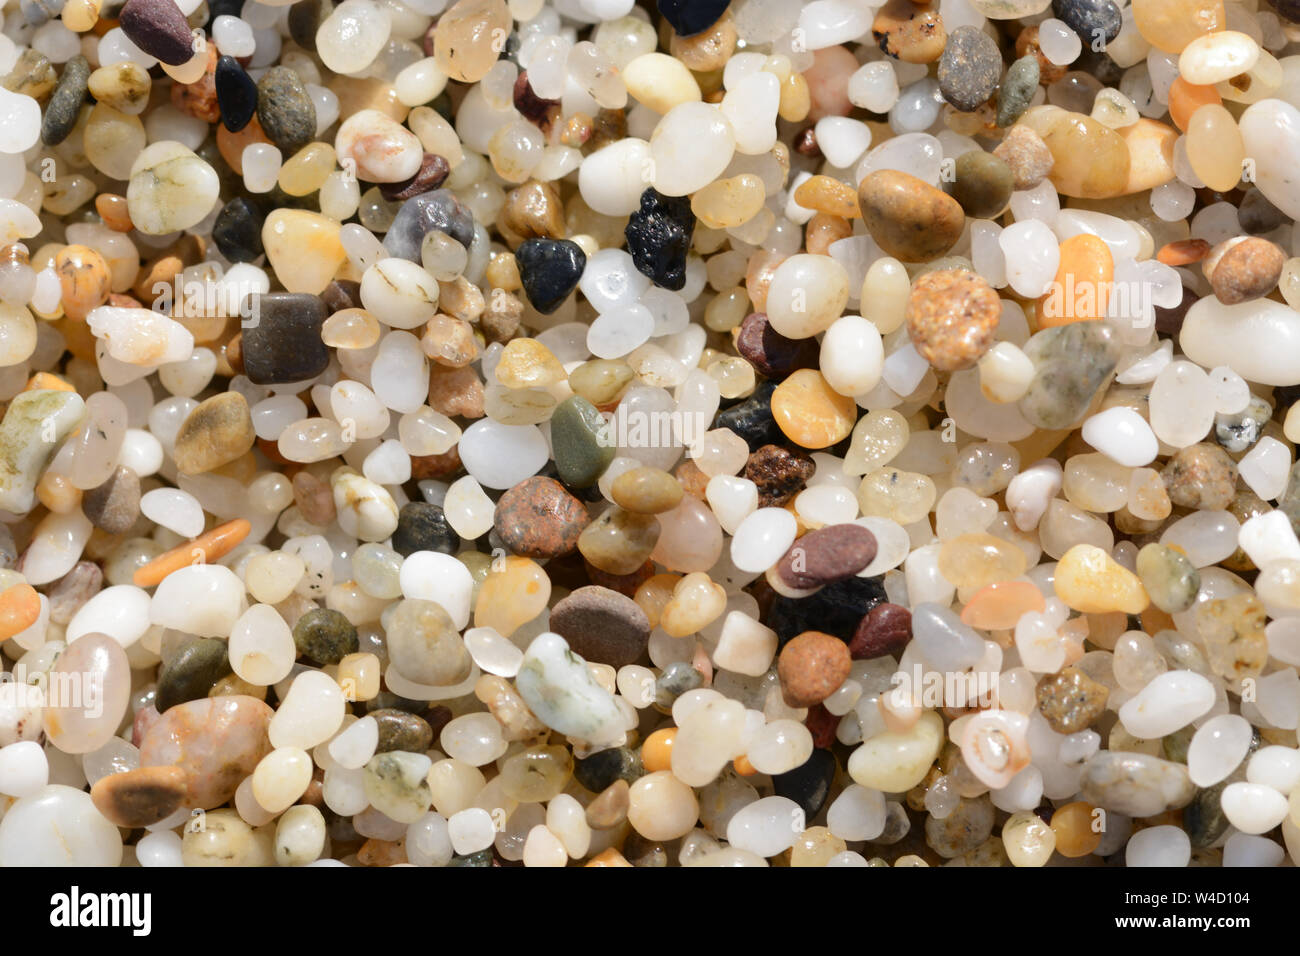 Details of corsed silica sand. Macro image of a marine deposit consisting of coarse sand Stock Photo